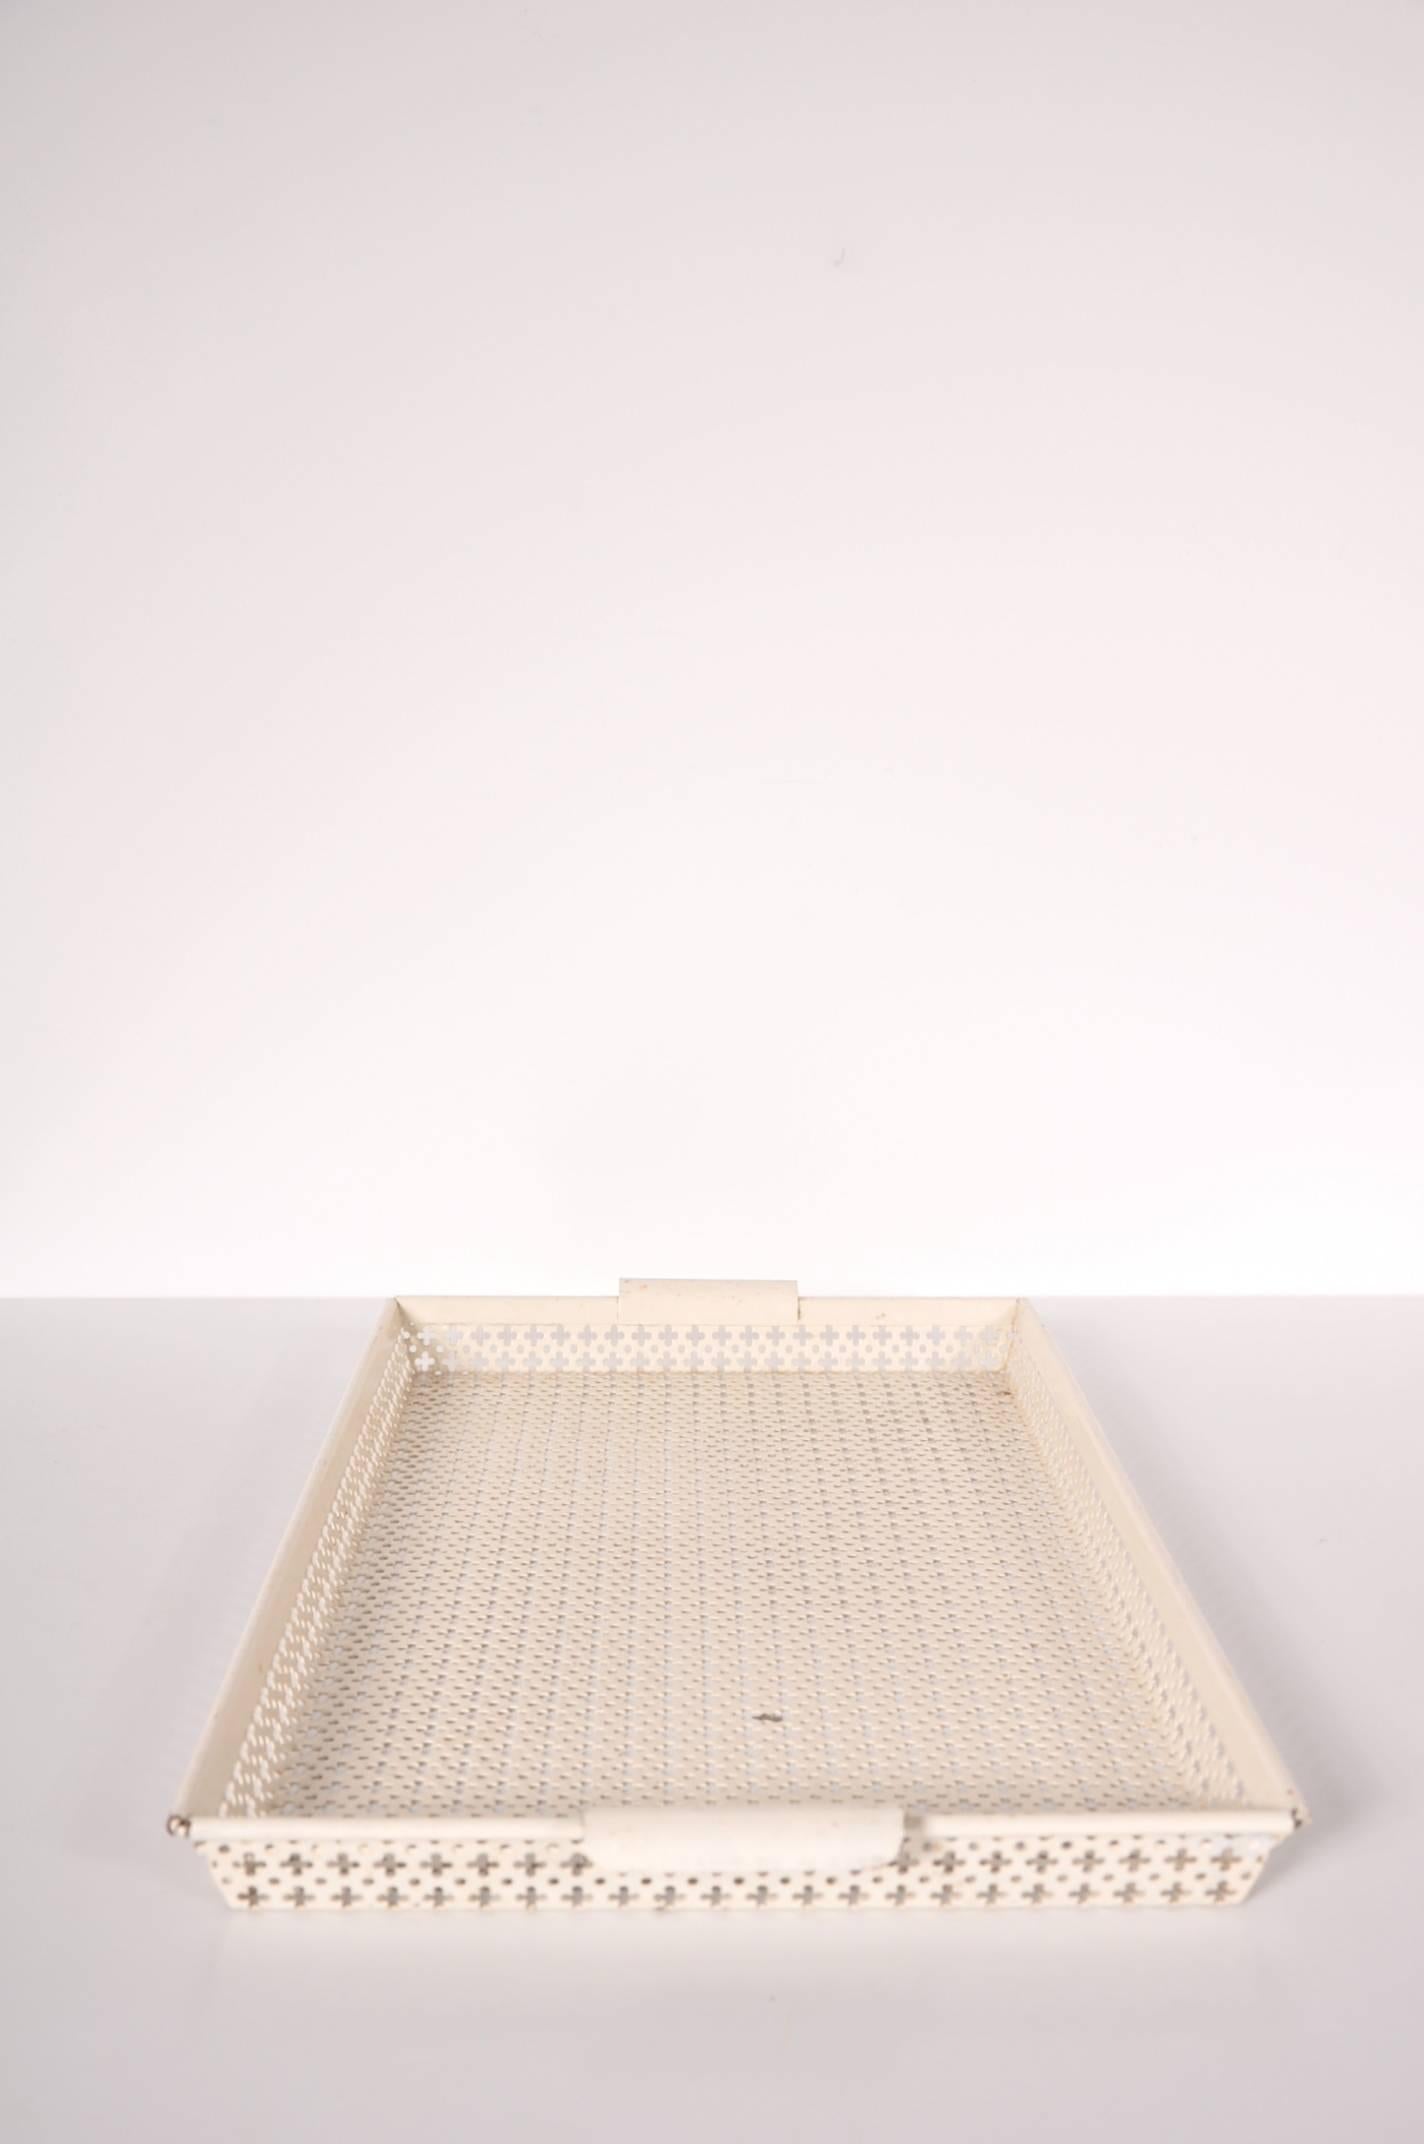 Beautiful perforated metal tray designed by Mathieu Matégot, manufactured by Ateliers Matégot in France, circa 1950.

This rare piece is crafted in the true Matégot style, made of white lacquered perforated metal with white metal grips.

In good